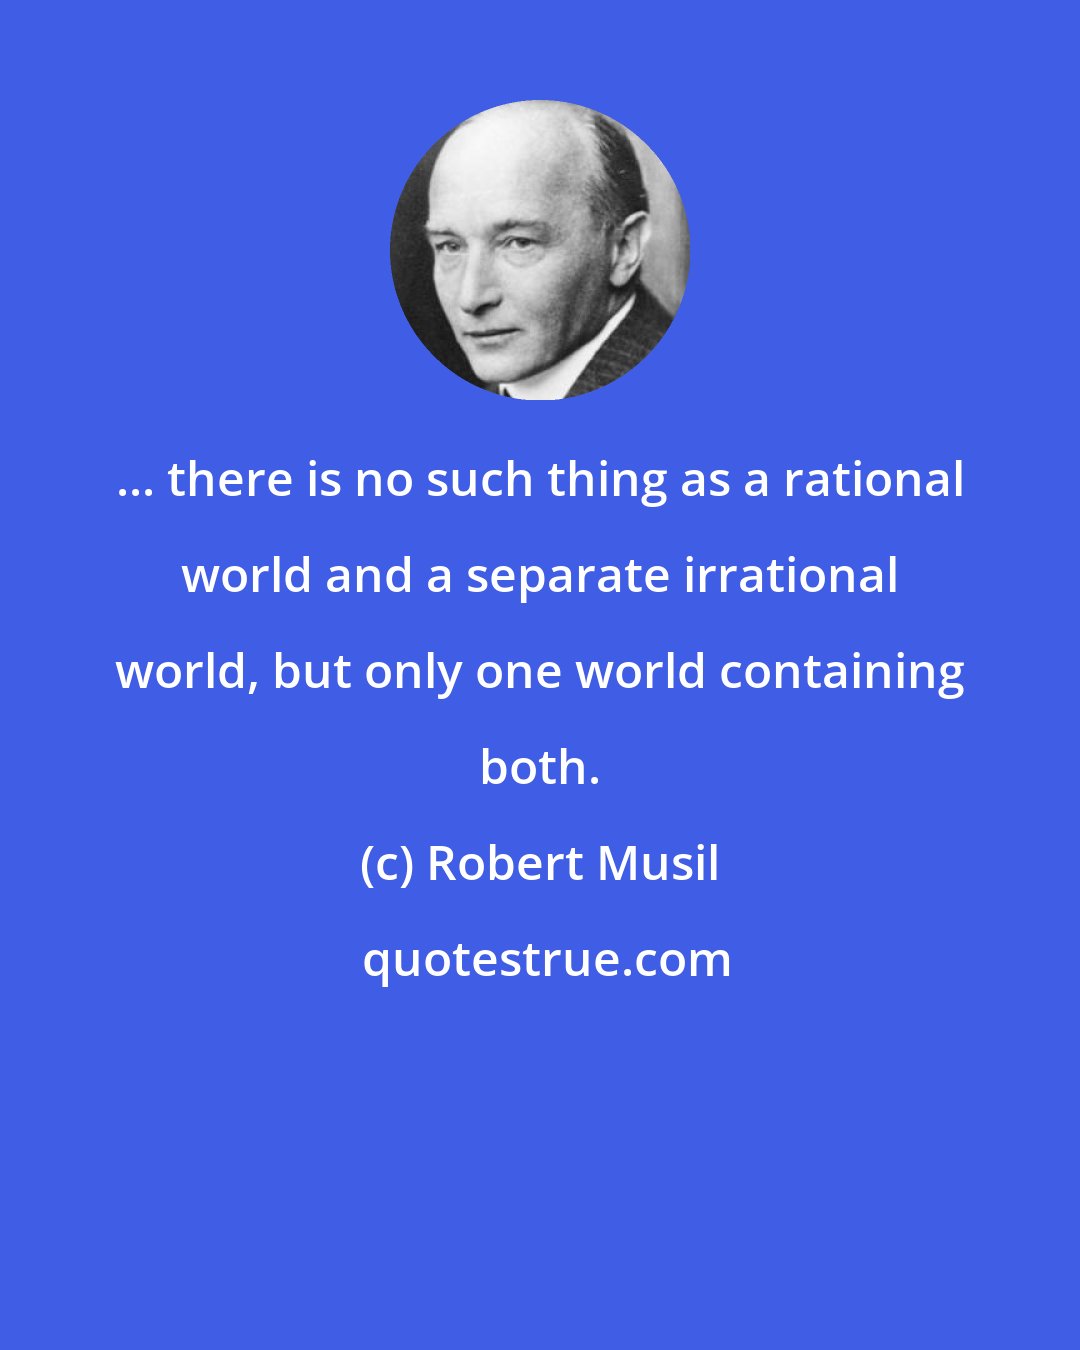 Robert Musil: ... there is no such thing as a rational world and a separate irrational world, but only one world containing both.